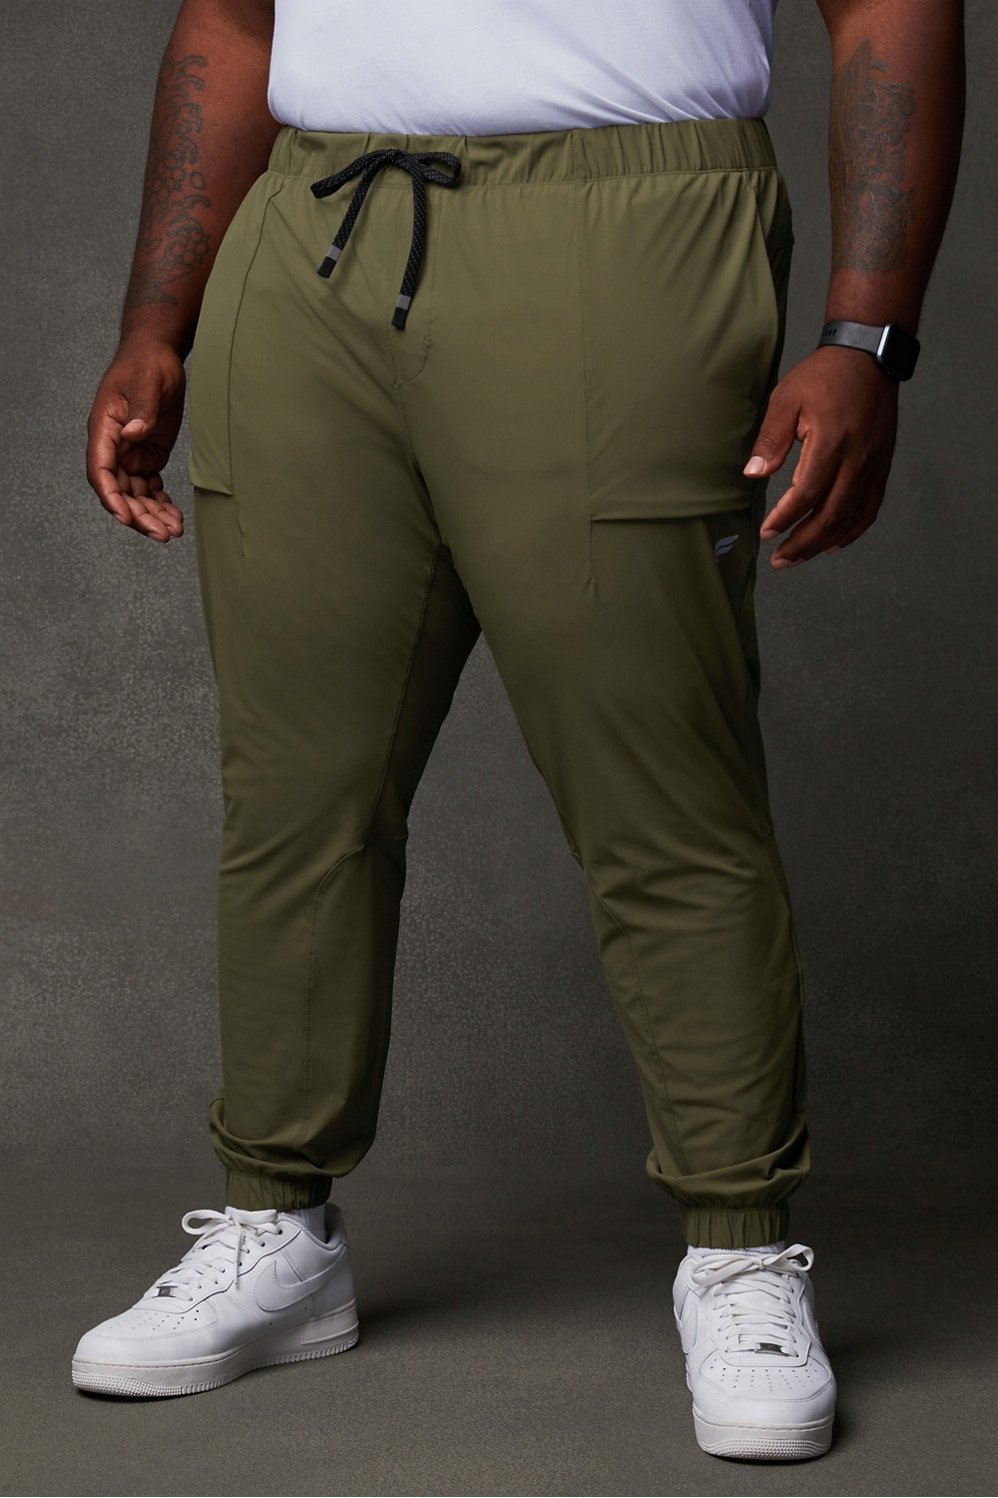 Want to purchase: Men's One Jogger - Dark Twill (Large, 29inch) : r/ Fabletics